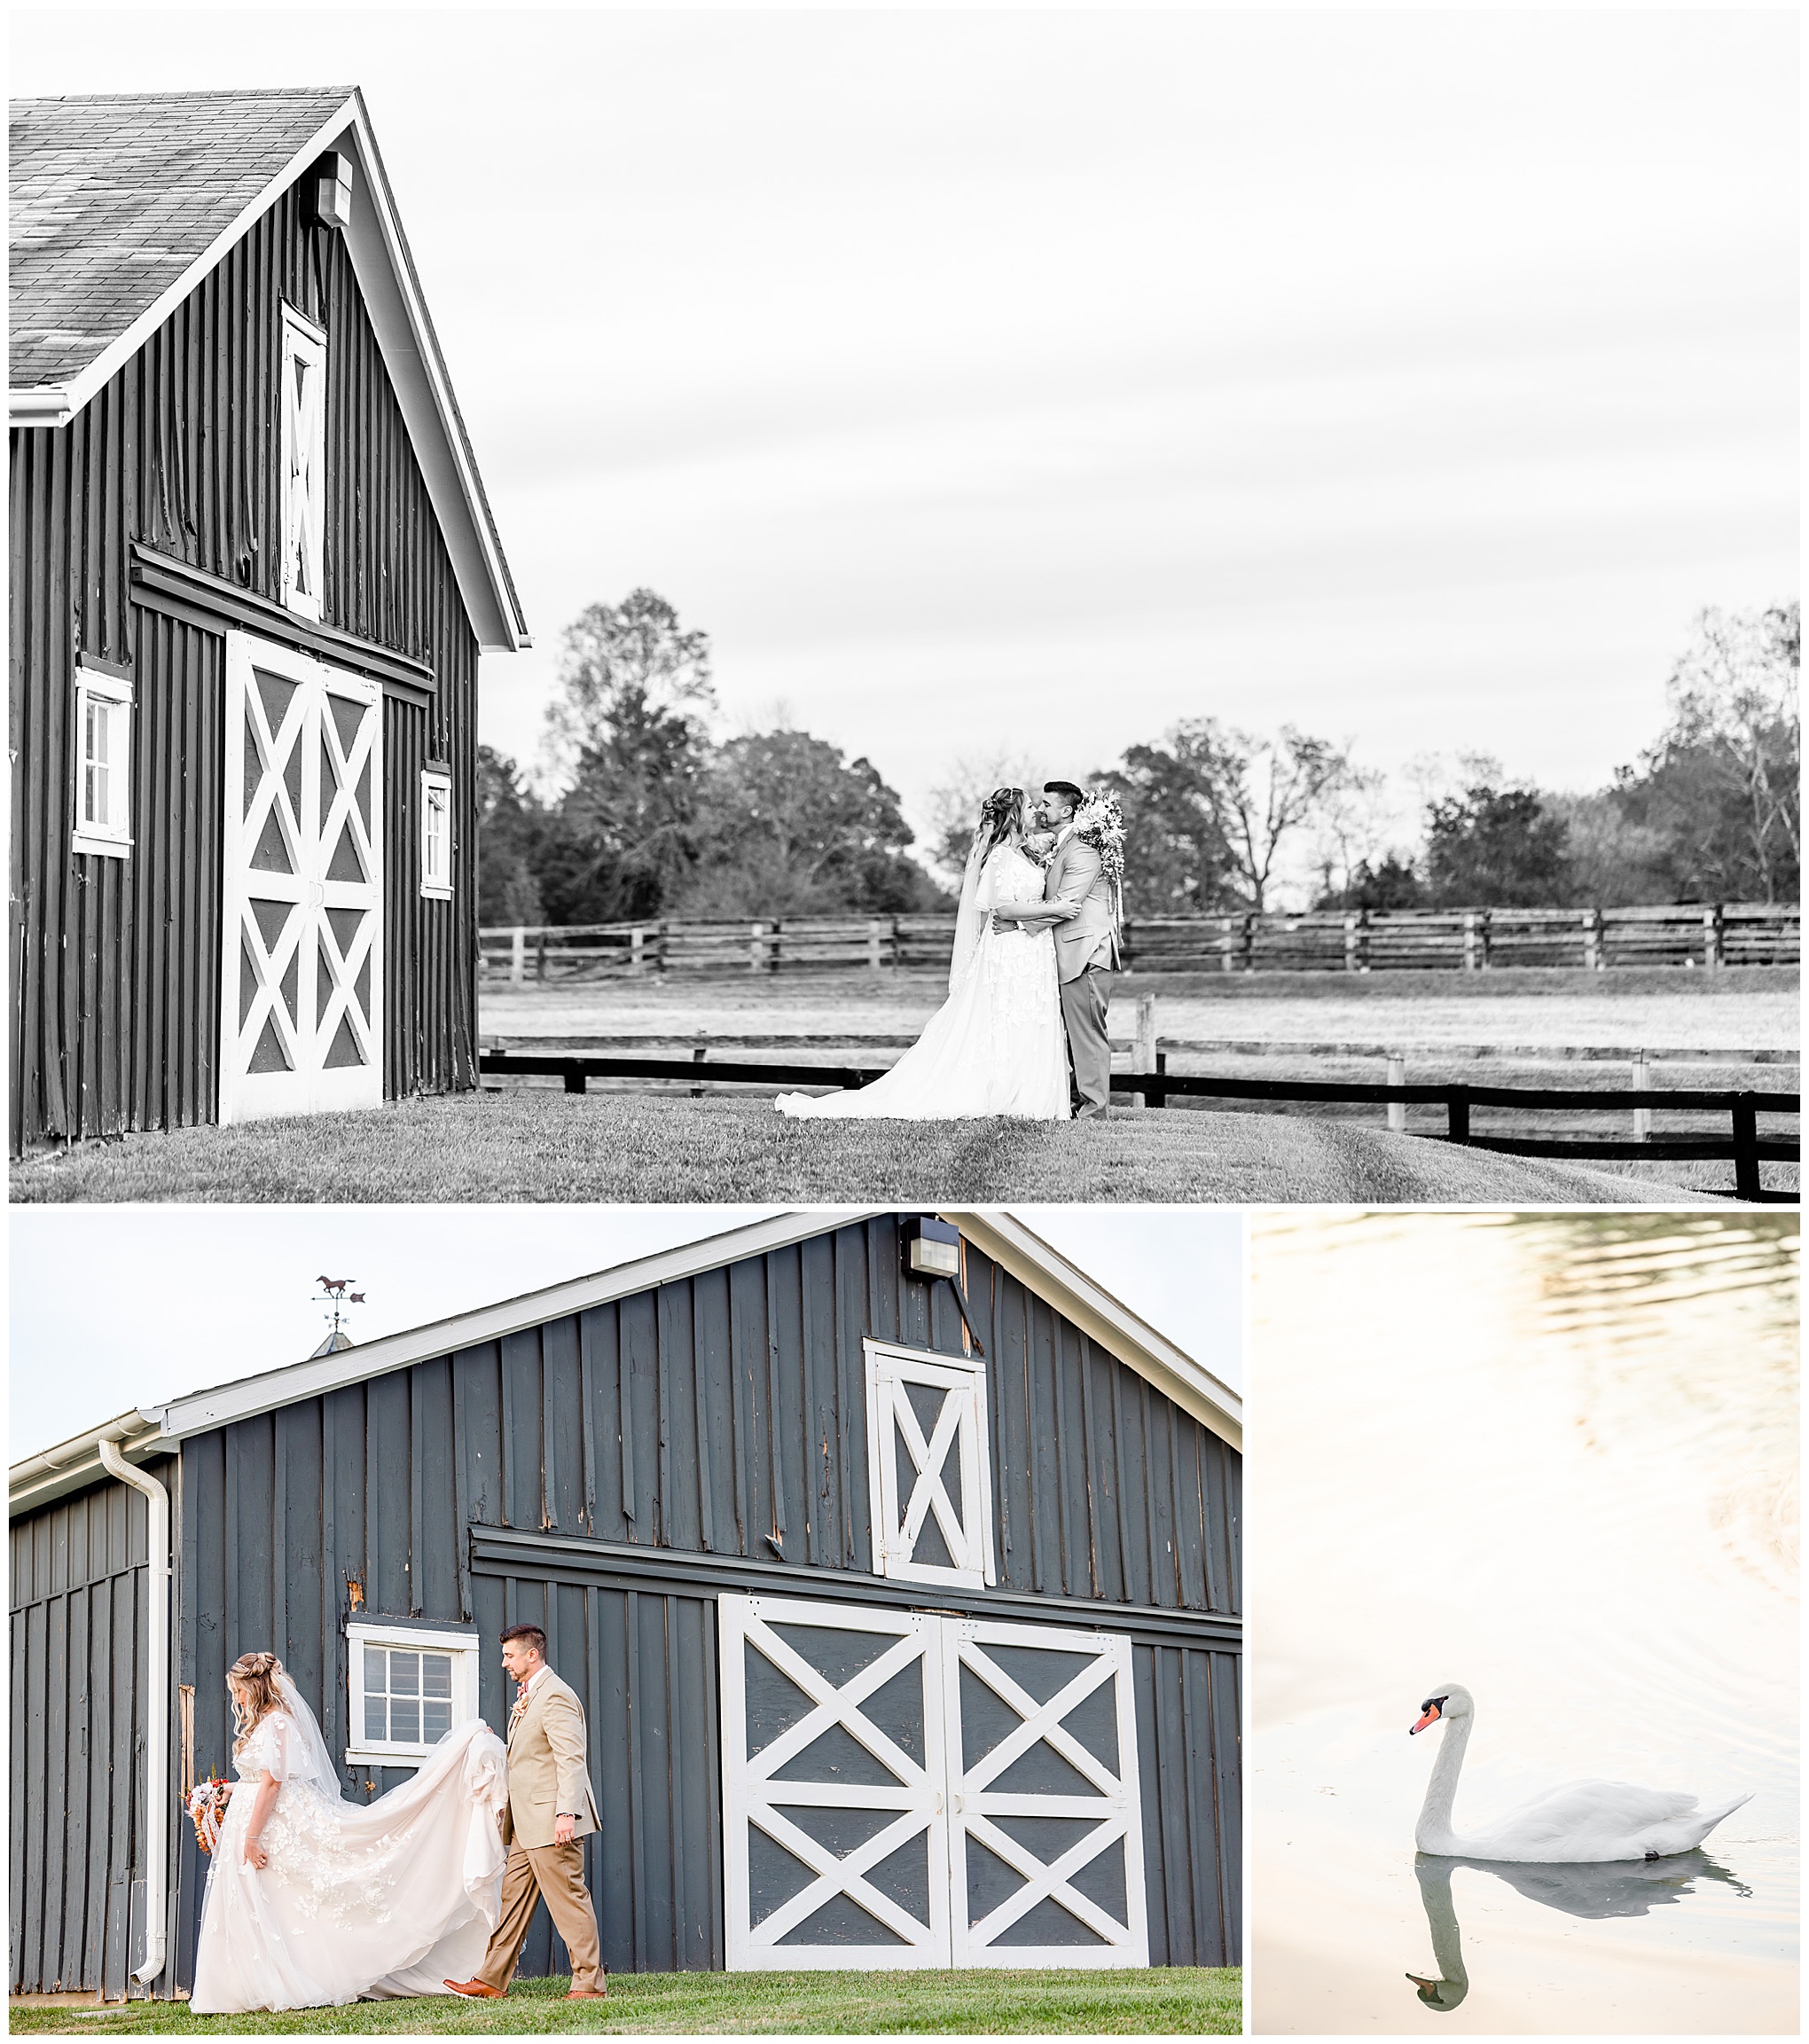 fall colors Middleburg Virginia wedding, Middleburg wedding, Middleburg wedding photographer, Loudoun County wedding photographer, northern Virginia wedding photographer, Middleburg Barn wedding, autumn wedding aesthetic, barn wedding aesthetic, elegant barn wedding, DC wedding photographer, Rachel E.H. Photography, black and white, bride and groom outside middleburg barn, swan in pond